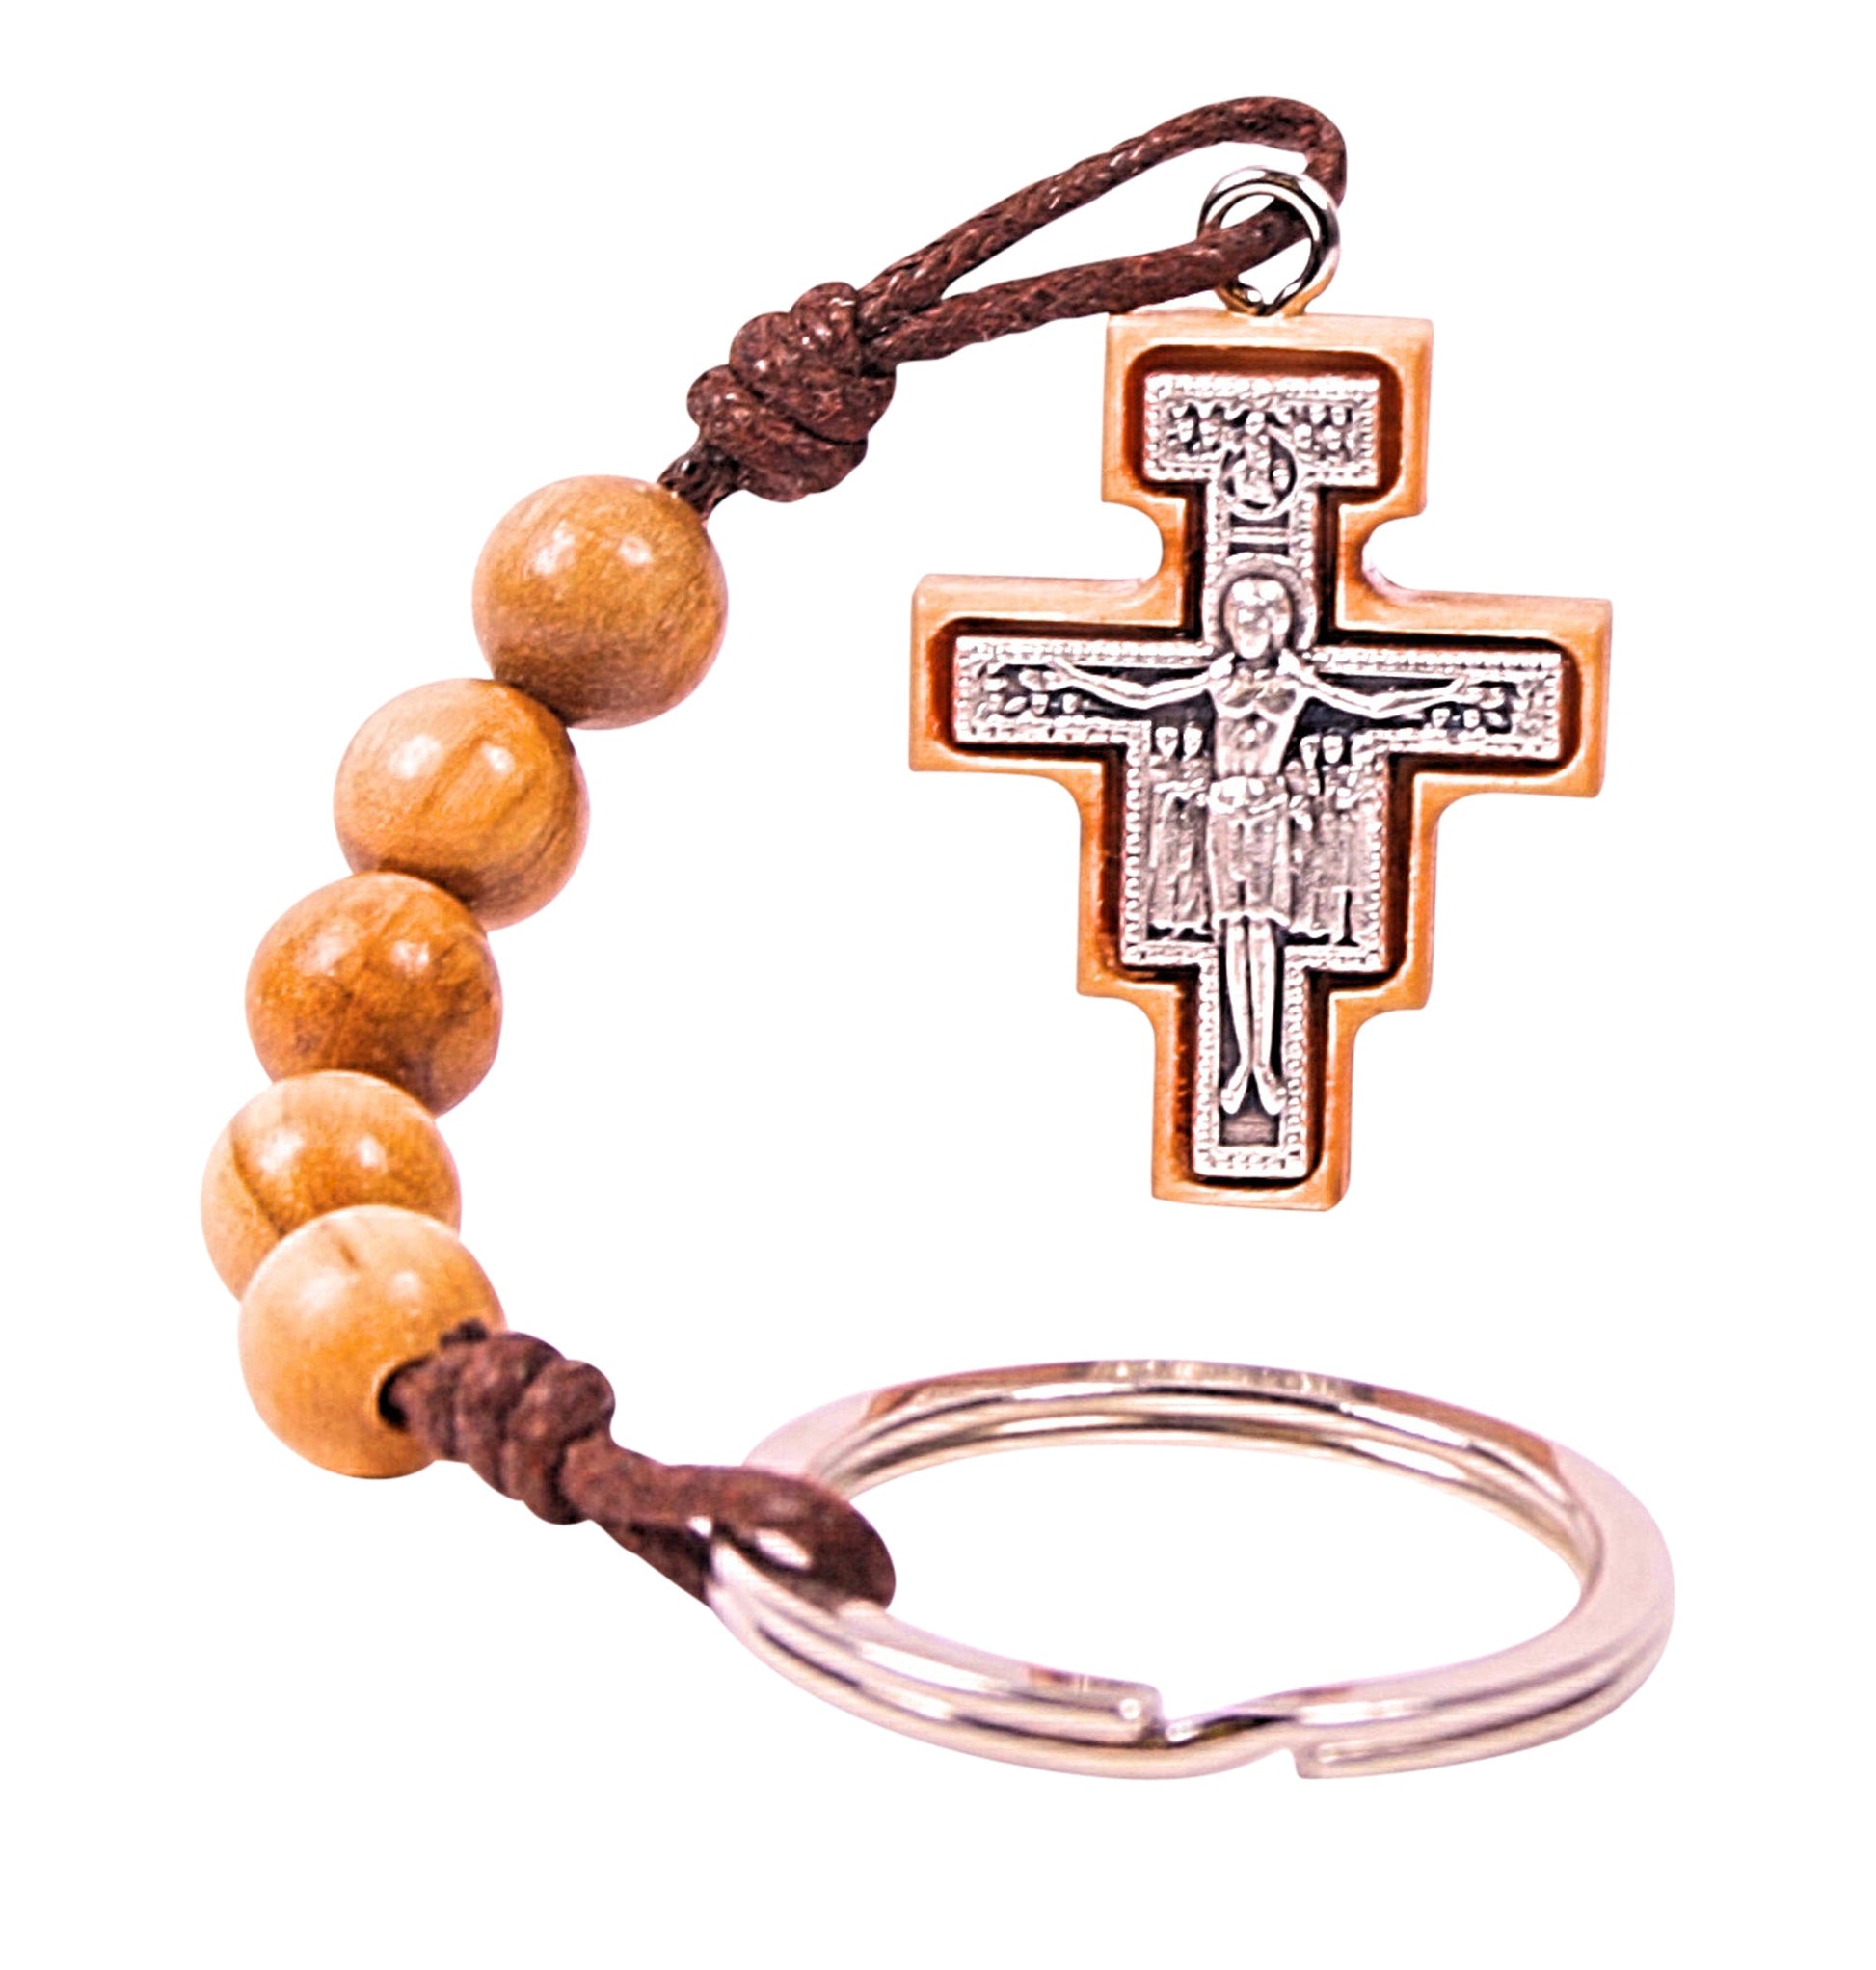 Olive wood keychain featuring a detailed San Damiano Crucifix in silver-toned metal, surrounded by an olive wood frame and accompanied by five olive wood beads on a braided cord.